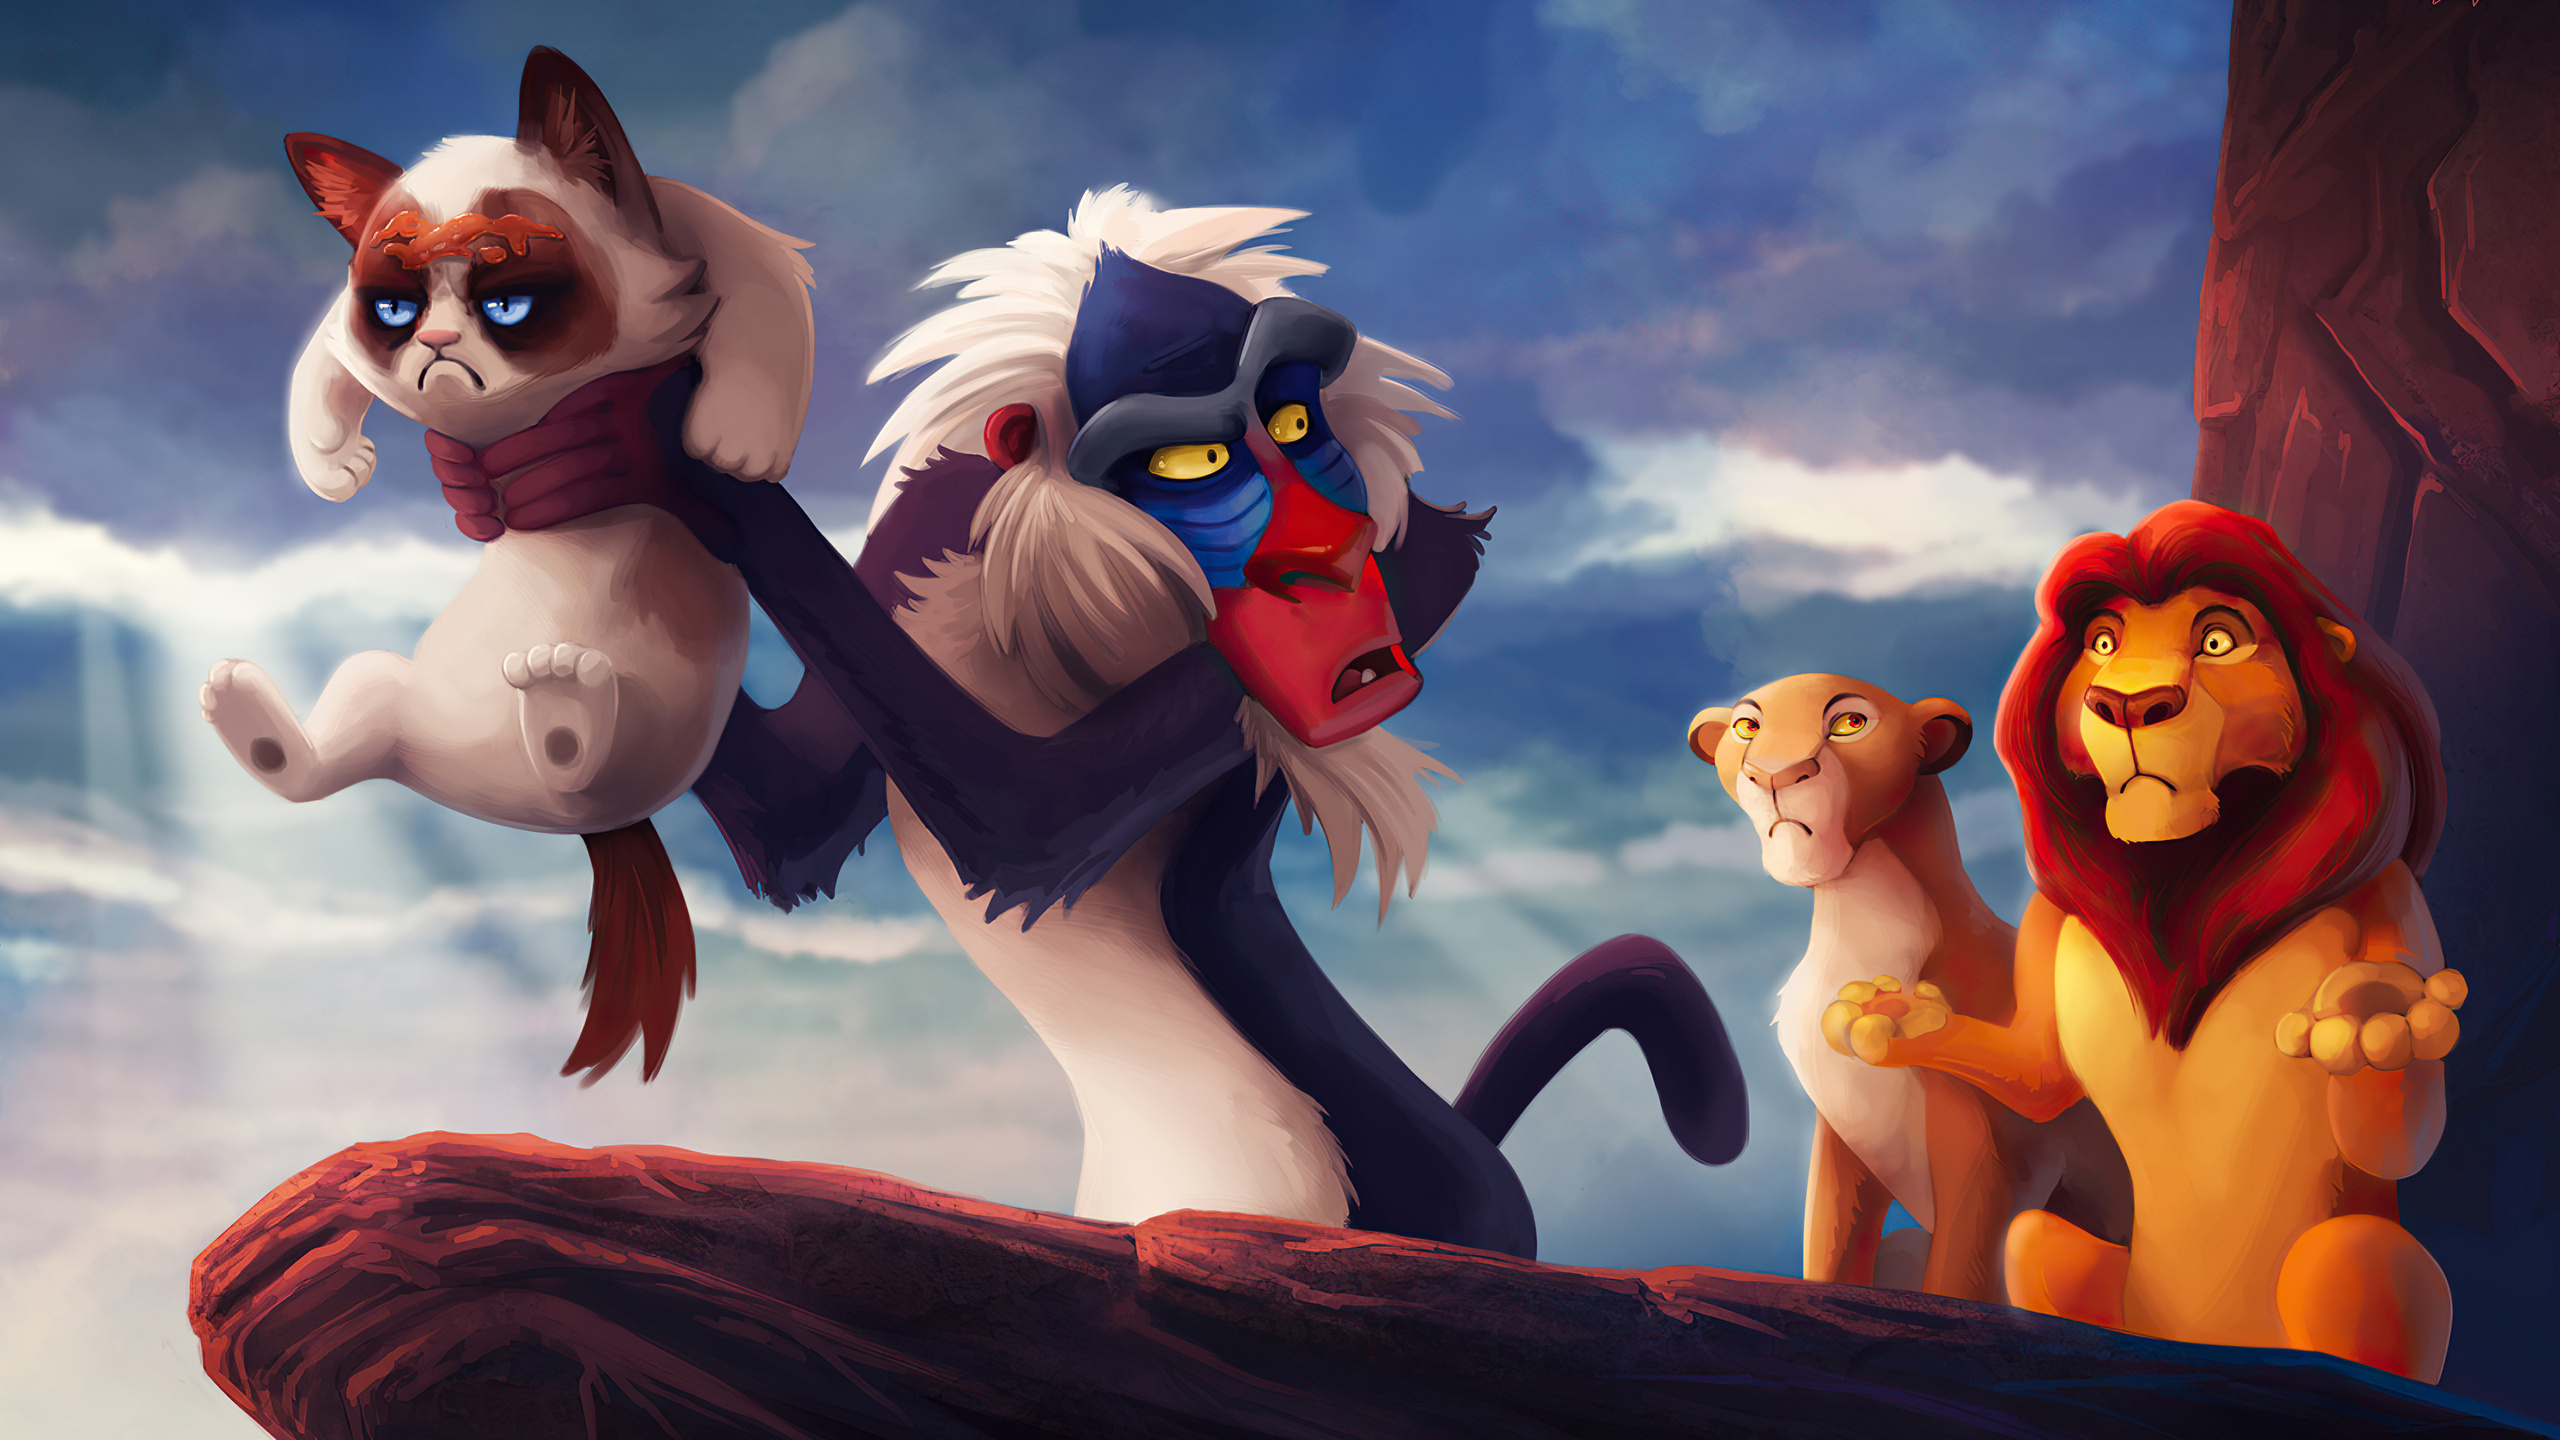 Grumpy Cat, Lion King crossover, Funny moments, Wallpaper collection, 2560x1440 HD Desktop